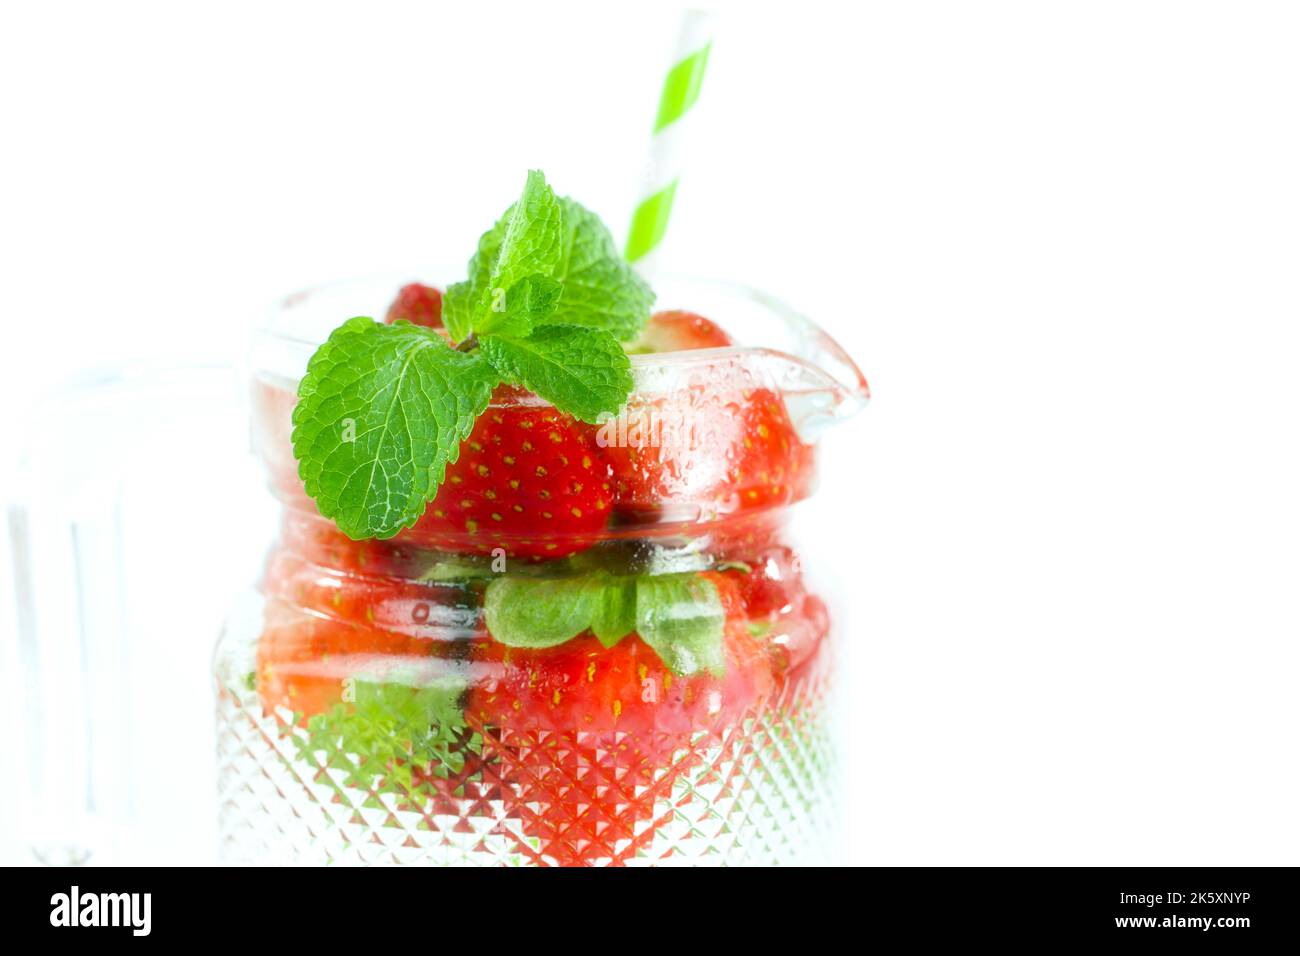 Strawberry flavored water for health conscious living Stock Photo